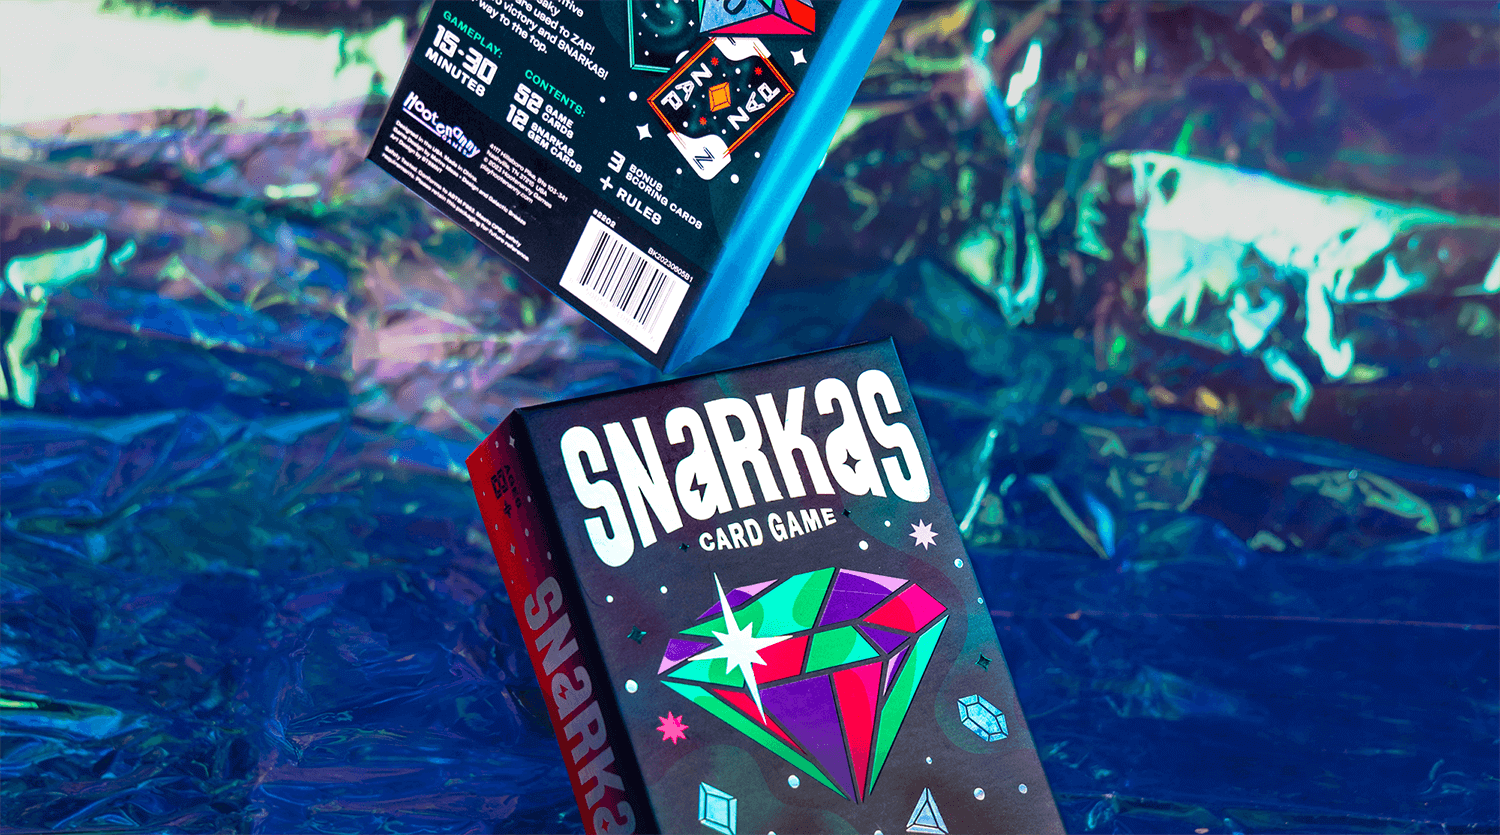 Snarkas card game front and back covers floating on holographic background as part of packaging design by ST8MNT